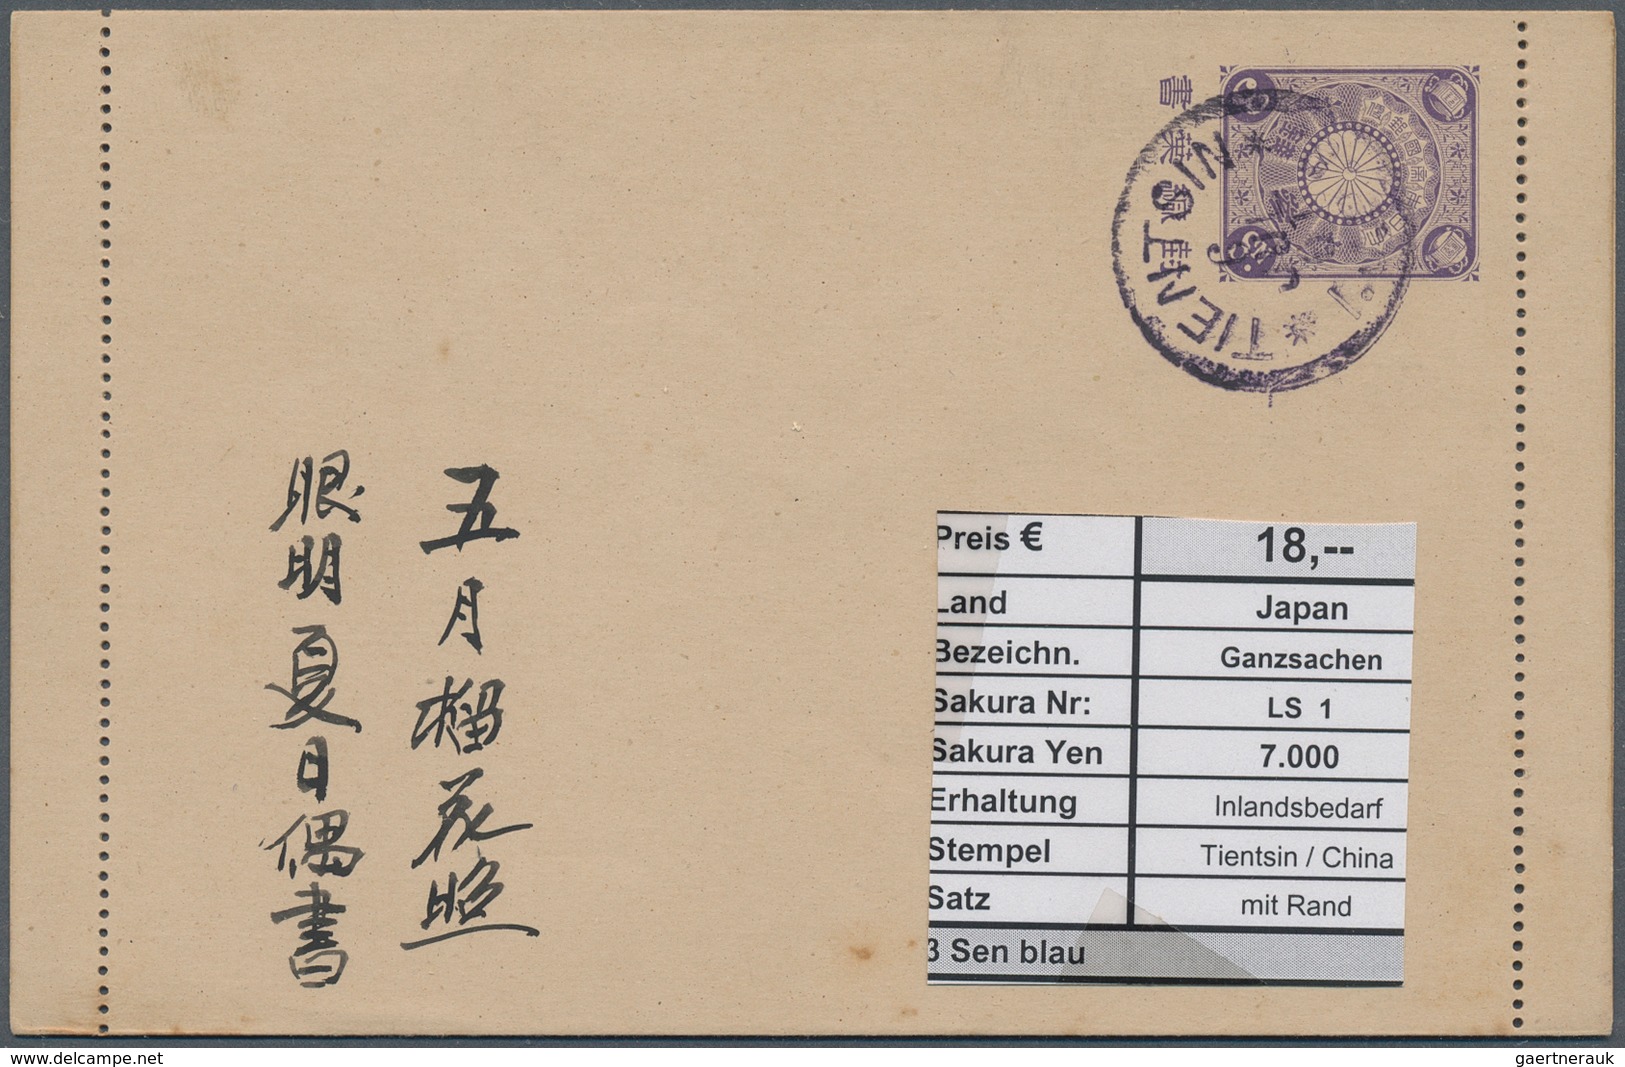 29475 Japan - Ganzsachen: 1874/1955, comprehensive collection of stationery cards/letter cards mint and us